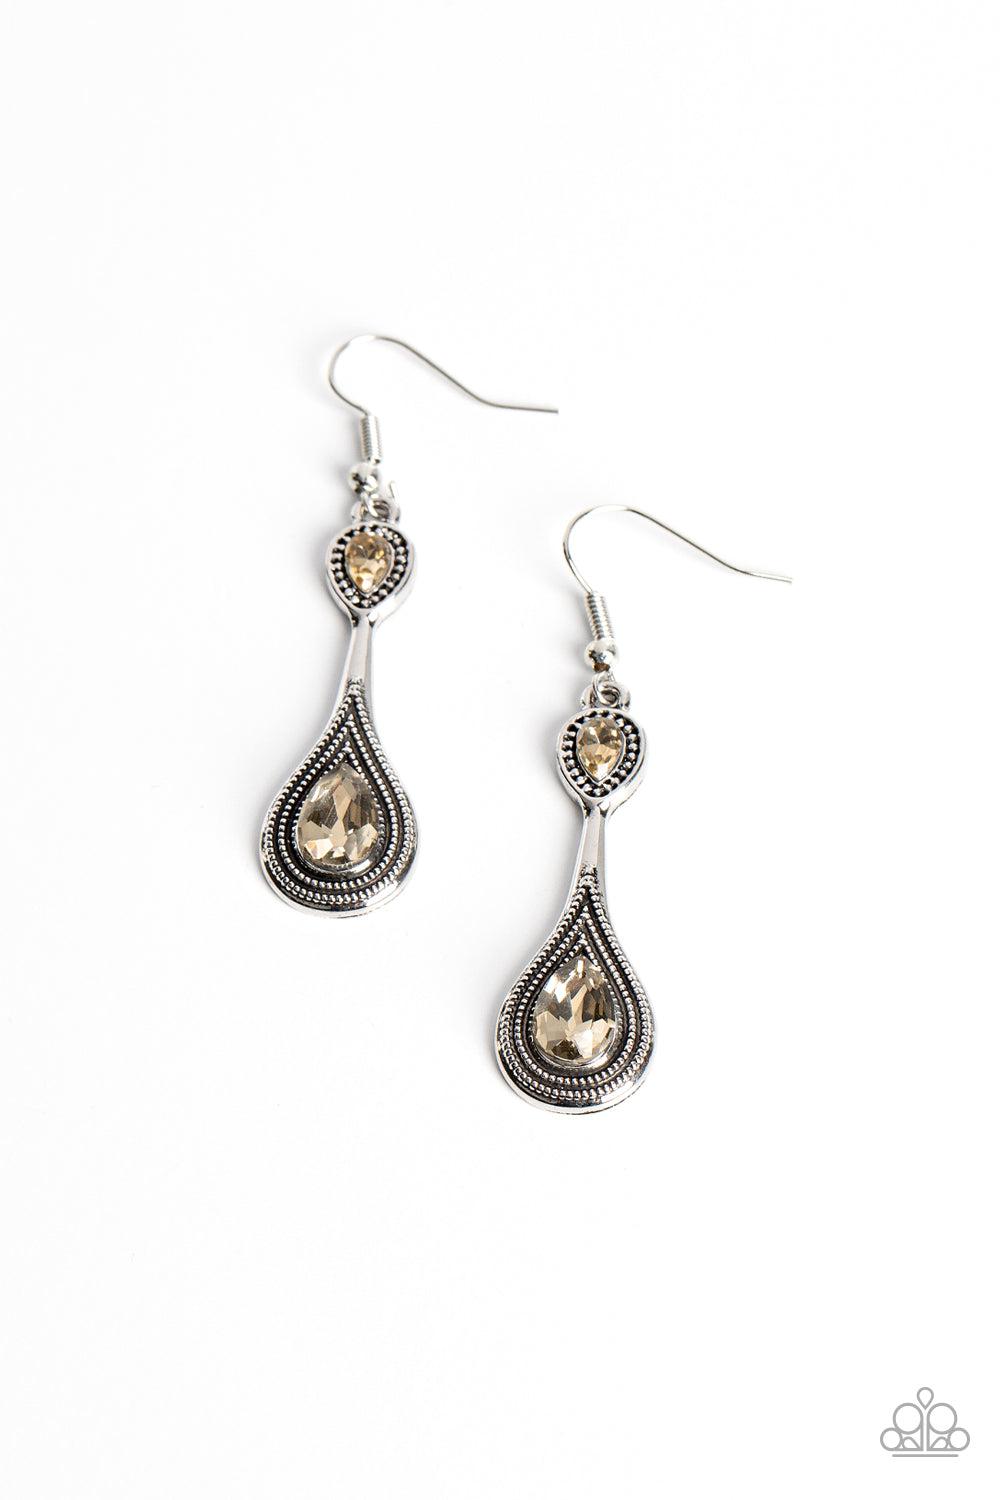 Dazzling Droplets Brown Rhinestone Earrings - Paparazzi Accessories- lightbox - CarasShop.com - $5 Jewelry by Cara Jewels